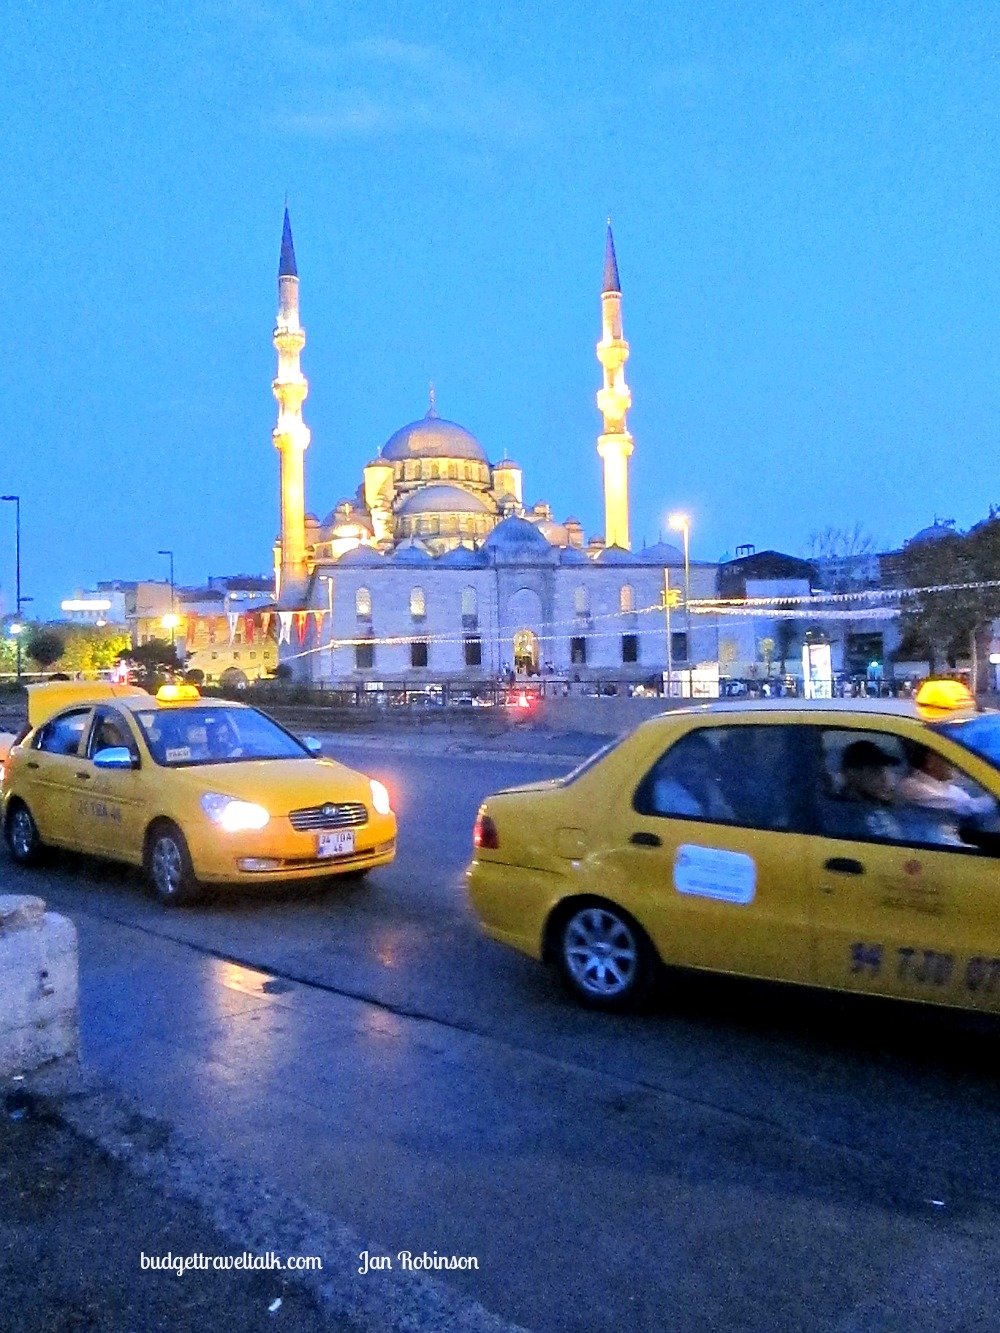 Istanbul Taxis and New Mosque